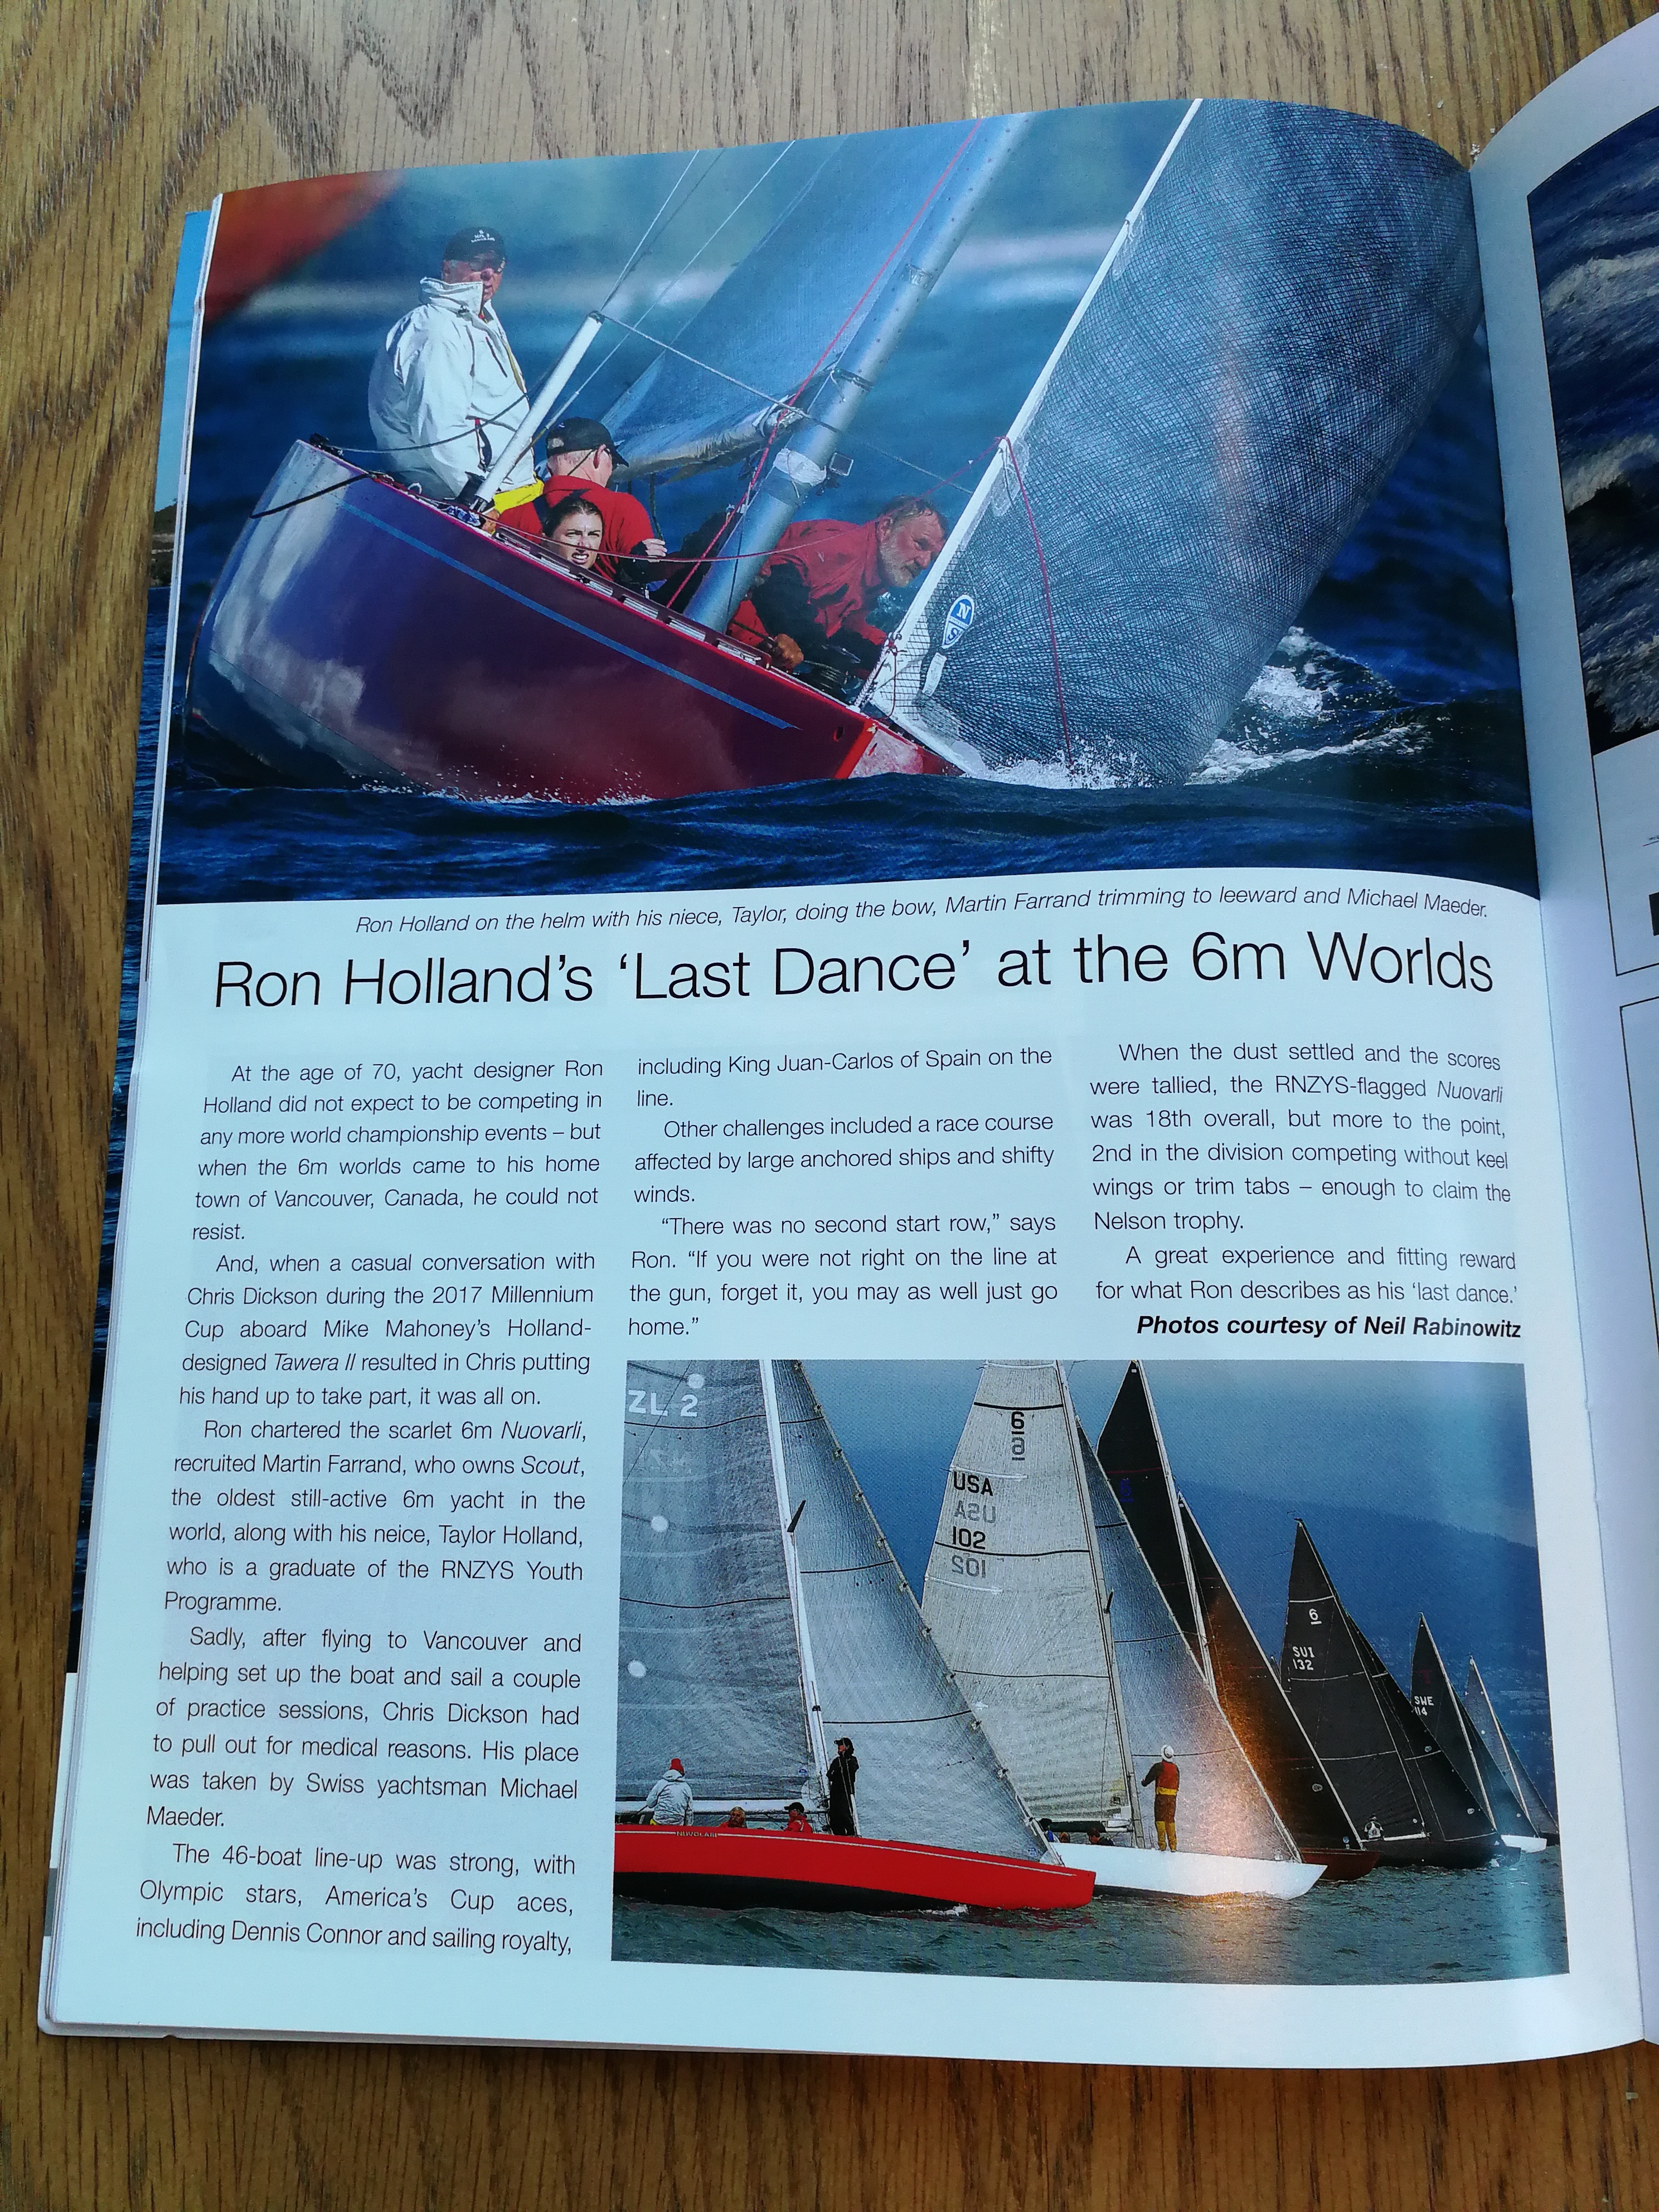 Royal New Zealand Yacht Squadron publication Breeze Magazine features Ron Holland at 6 Metre Worlds, photos and story